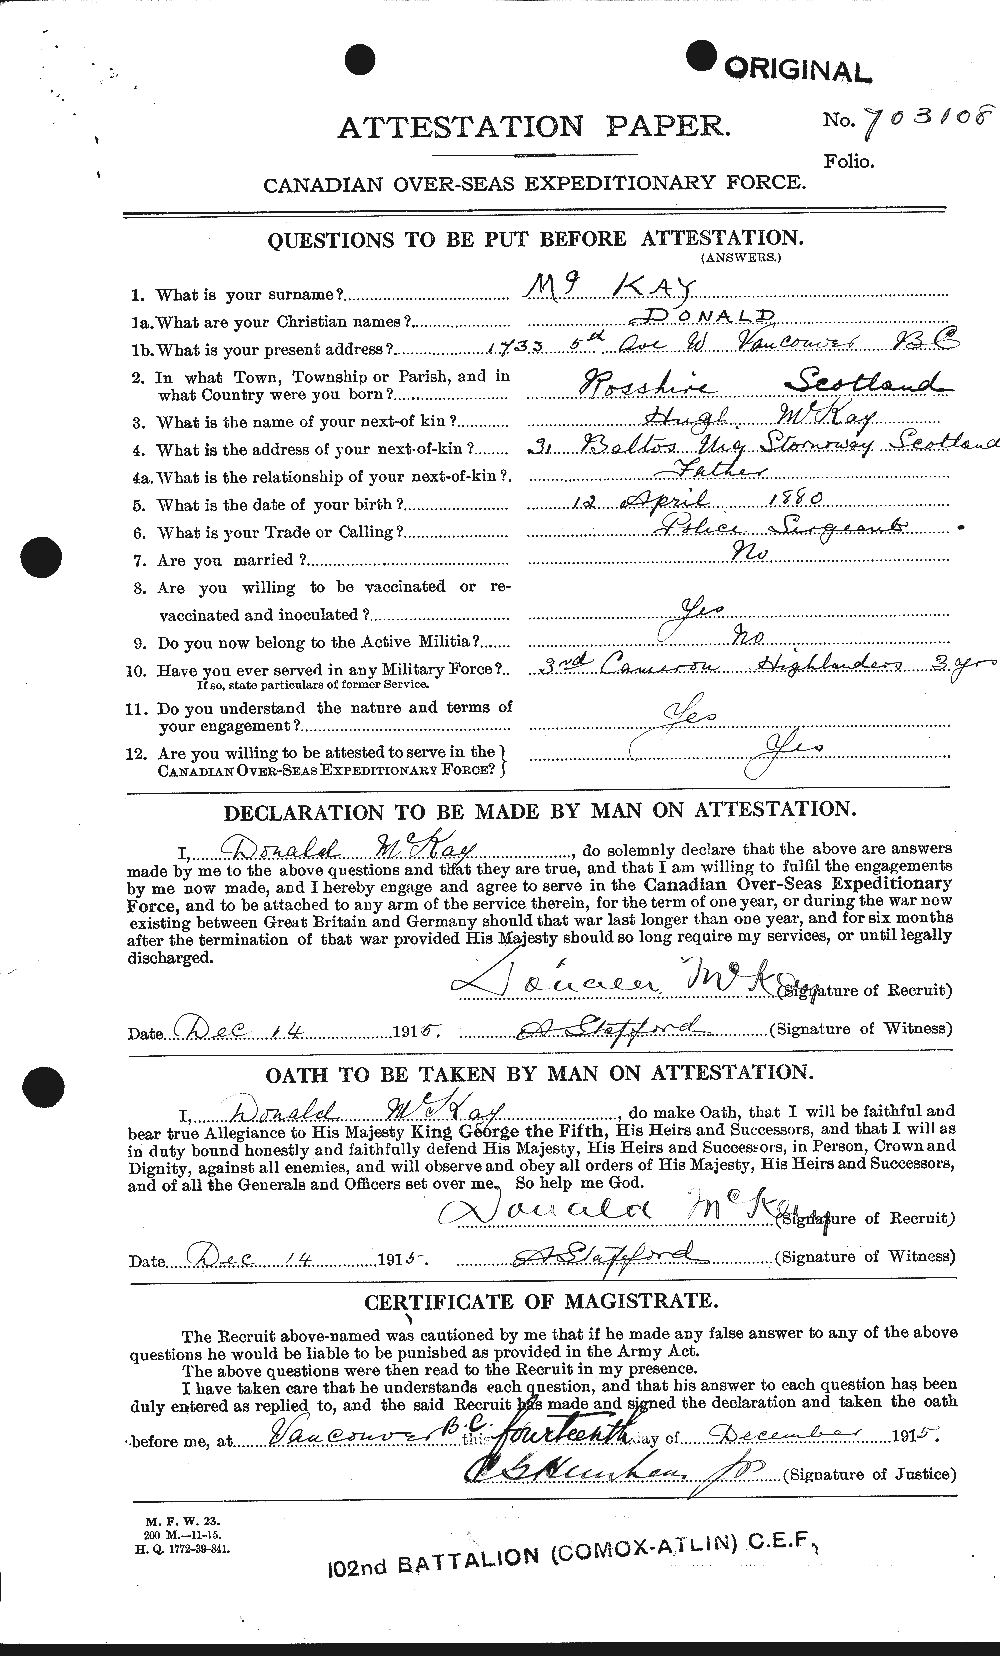 Personnel Records of the First World War - CEF 531146a